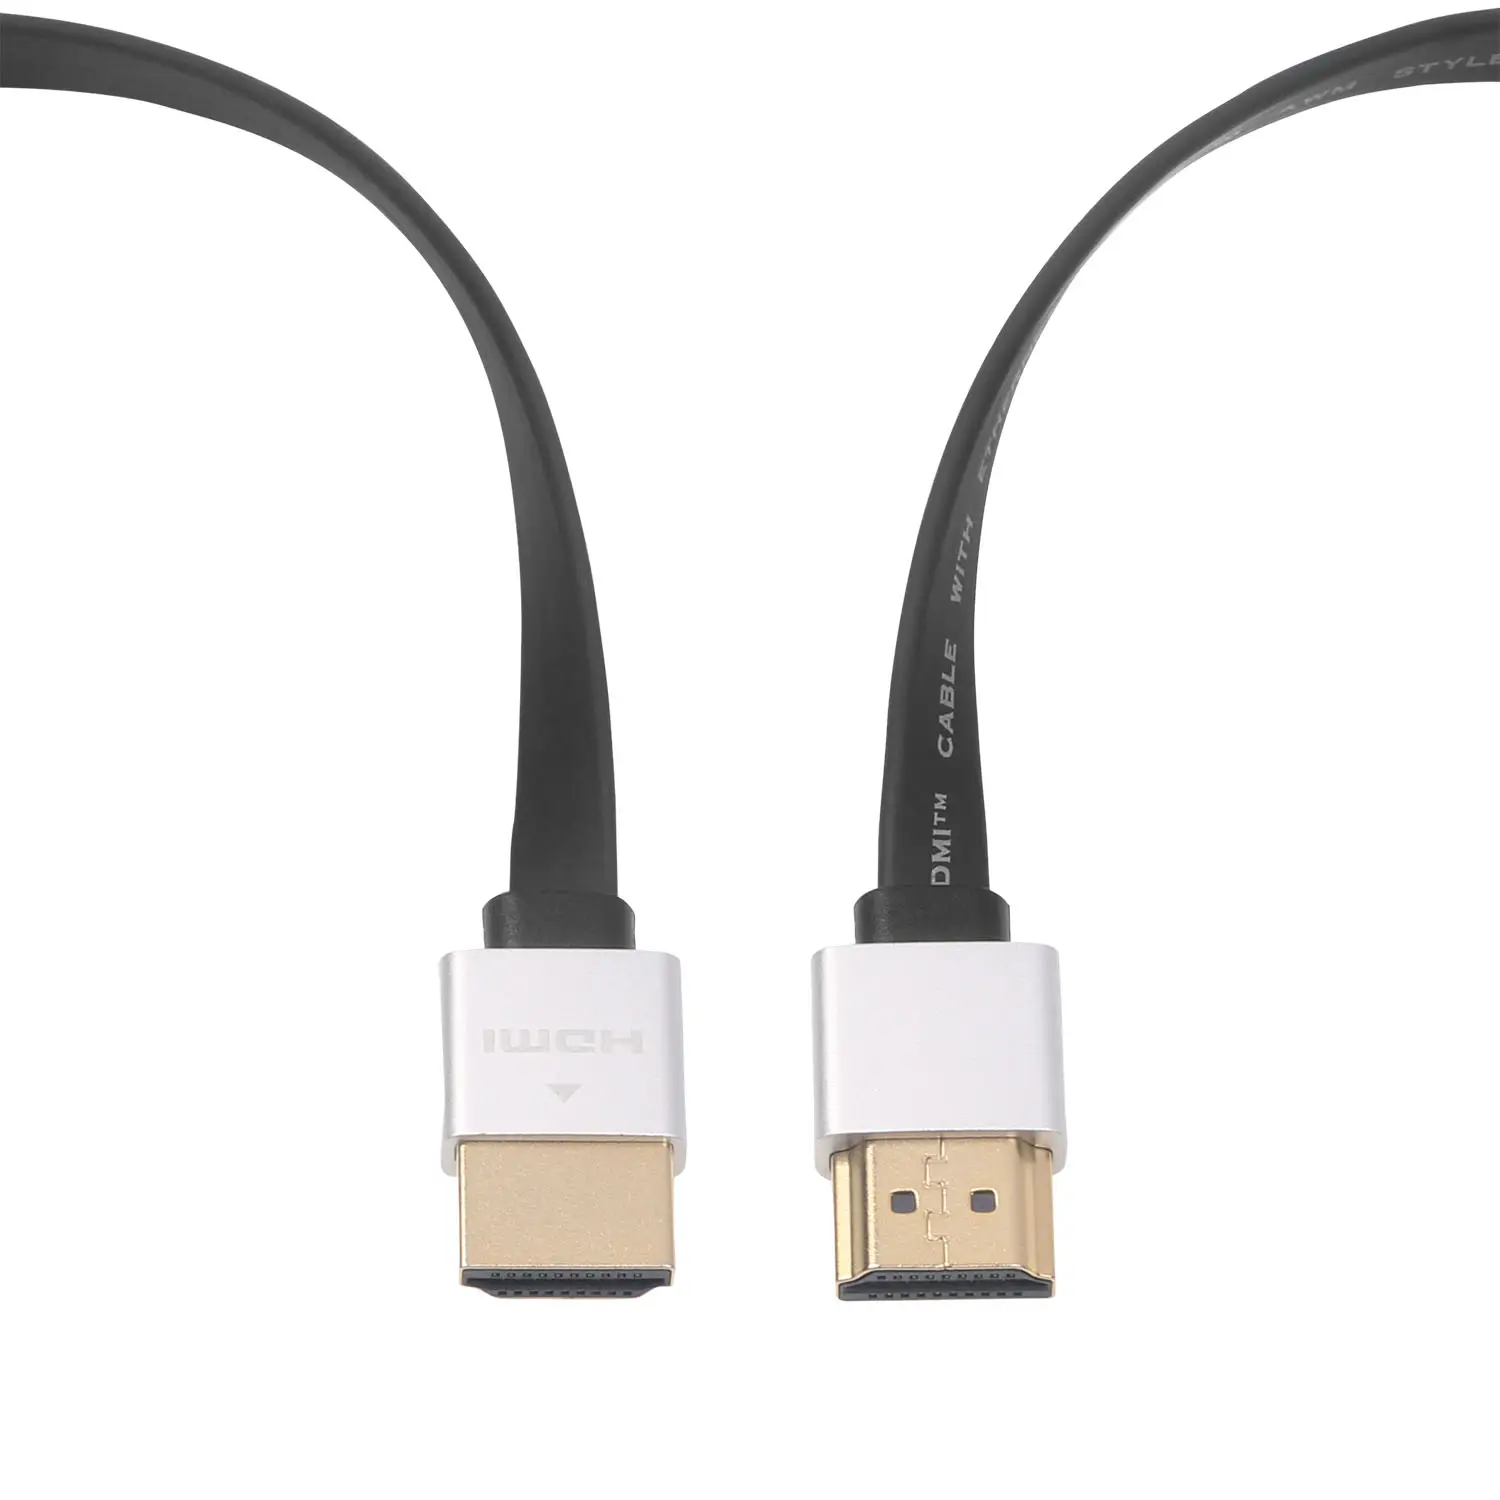 Flat HDMI Cable - High Speed HDMI Cord - Supports/ 4K Video at 60 Hz/ 3D/ 2160p - HDMI Latest Standard